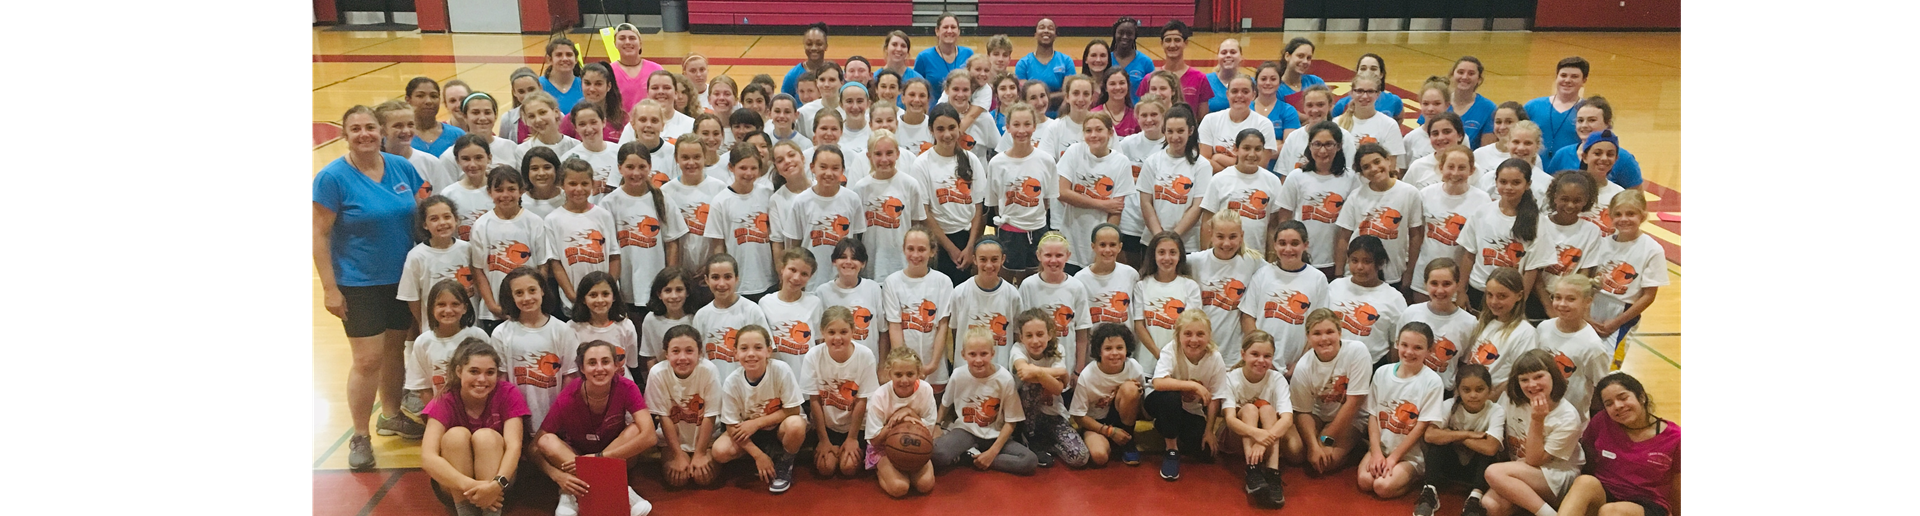 2019 All Camp Photo